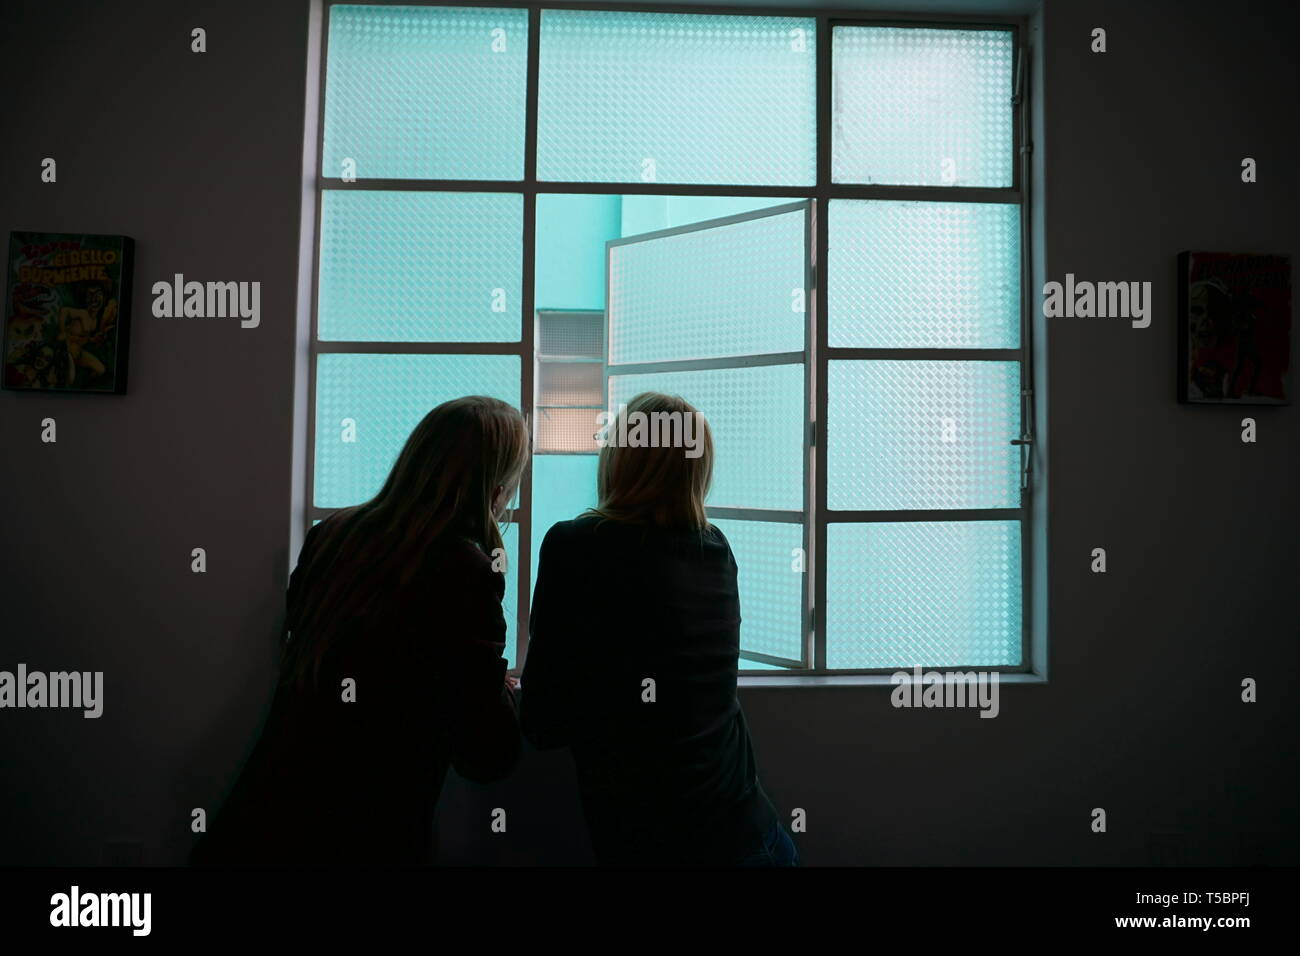 Silhouette of woman and girl looking out window of frosted glass, turquoise window. Stock Photo